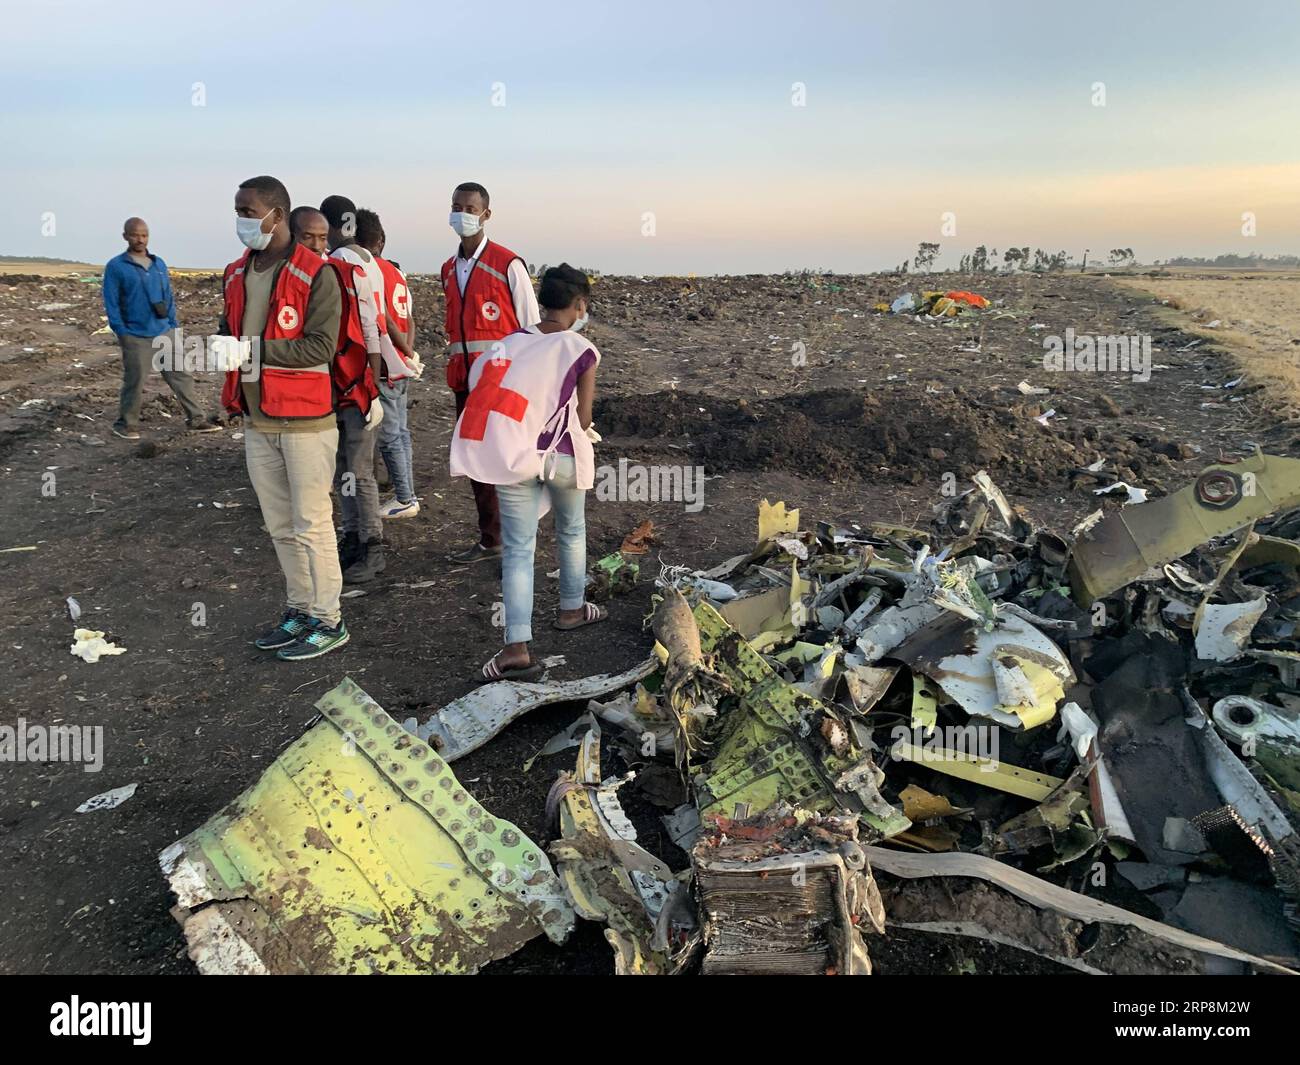 (190310) -- ADDIS ABABA, March 10, 2019 (Xinhua) -- Rescuers work beside the wreckage of an Ethiopian Airlines aircraft at the crash site, some 50 km east of Addis Ababa, capital of Ethiopia, on March 10, 2019. All 157 people aboard Ethiopian Airlines flight were confirmed dead as Africa s fastest growing airline witnessed the worst-ever incident in its history. The incident on Sunday, which involved a Boeing 737-800 MAX, occurred a few minutes after the aircraft took off from Addis Ababa Bole International Airport to Nairobi, Kenya. It crashed around Bishoftu town, the airline said. (Xinhua/W Stock Photo